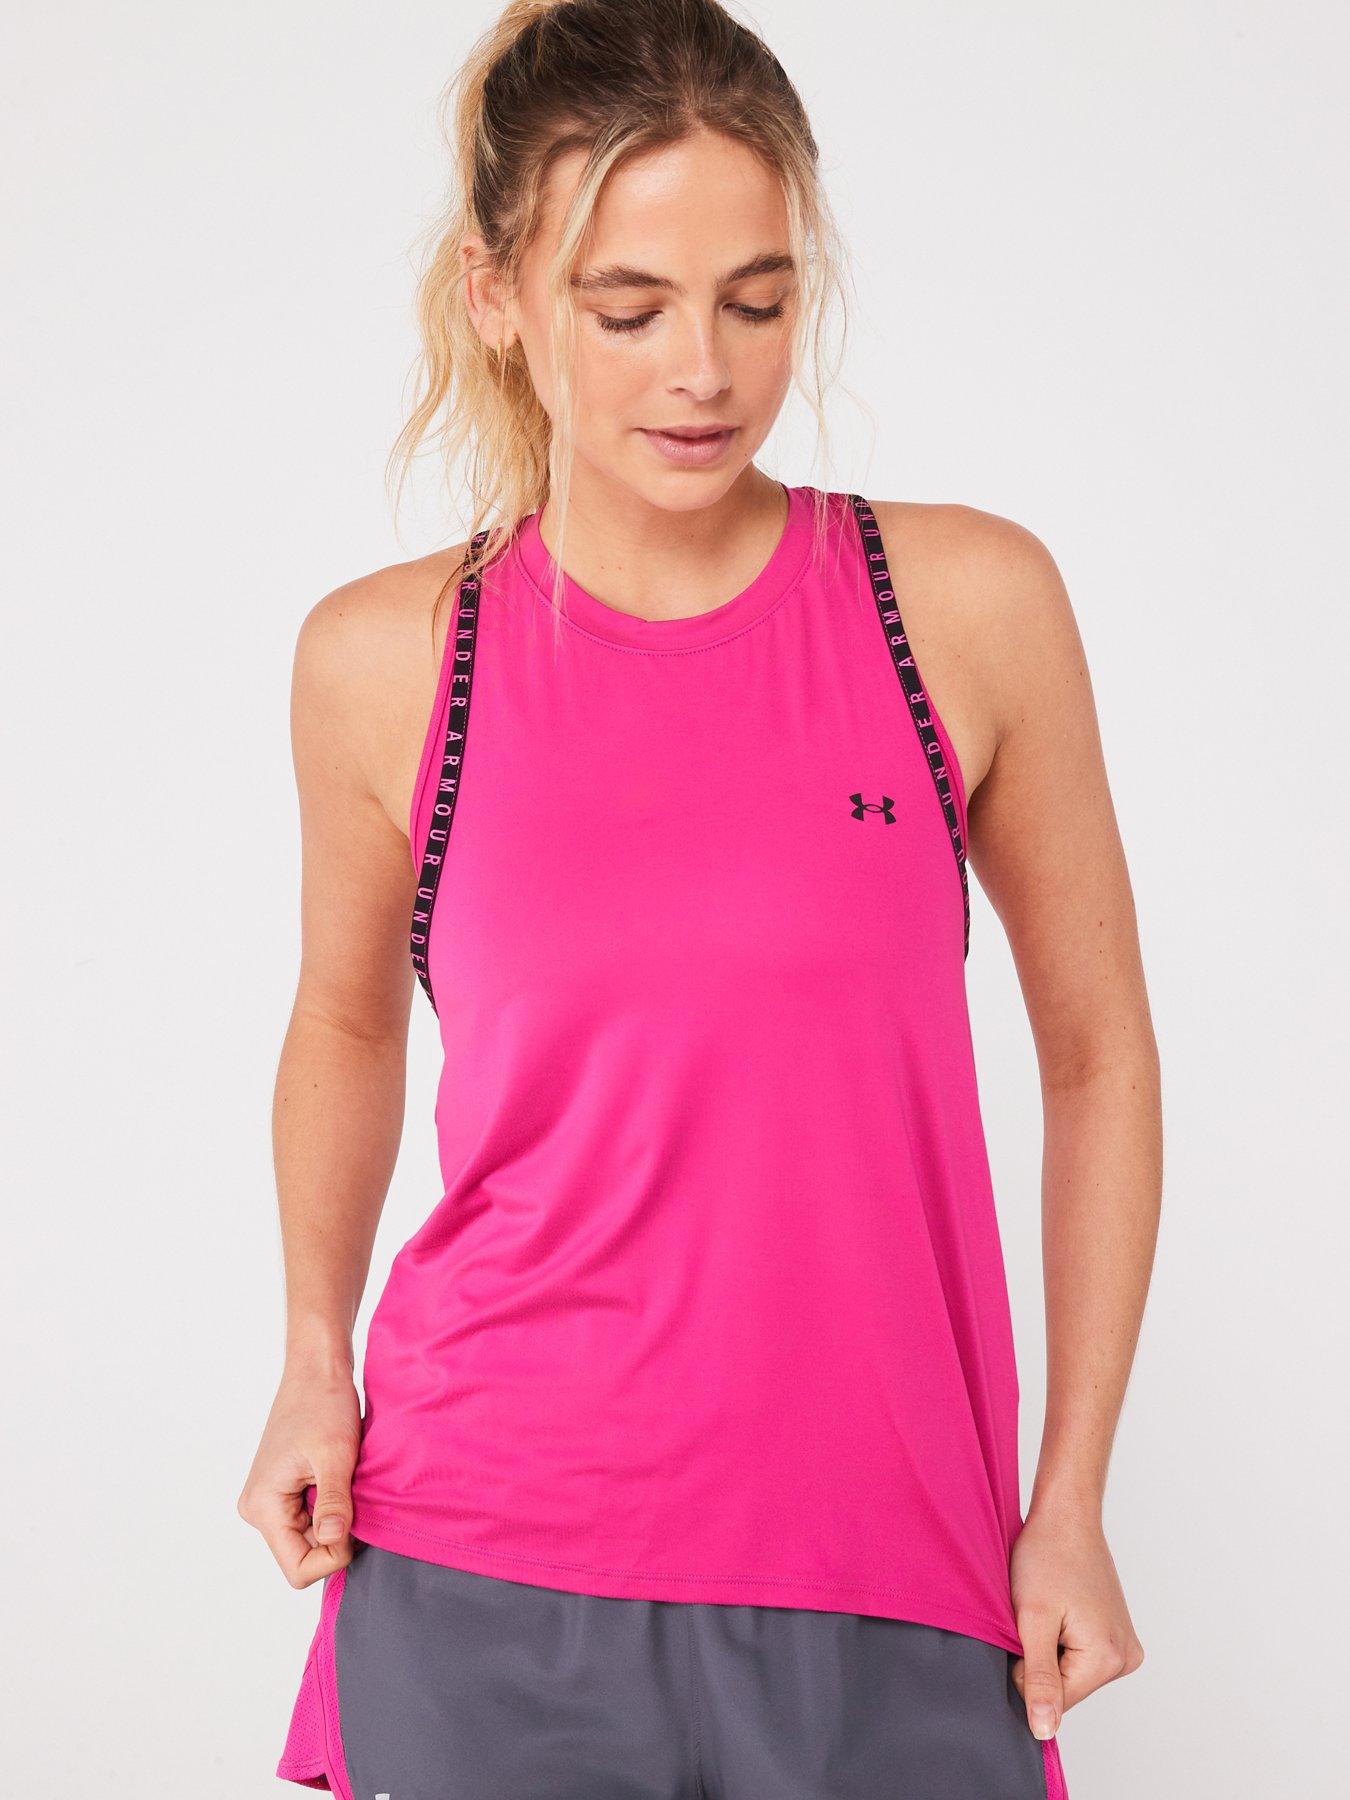 Under Armour Training knockout vest in pink